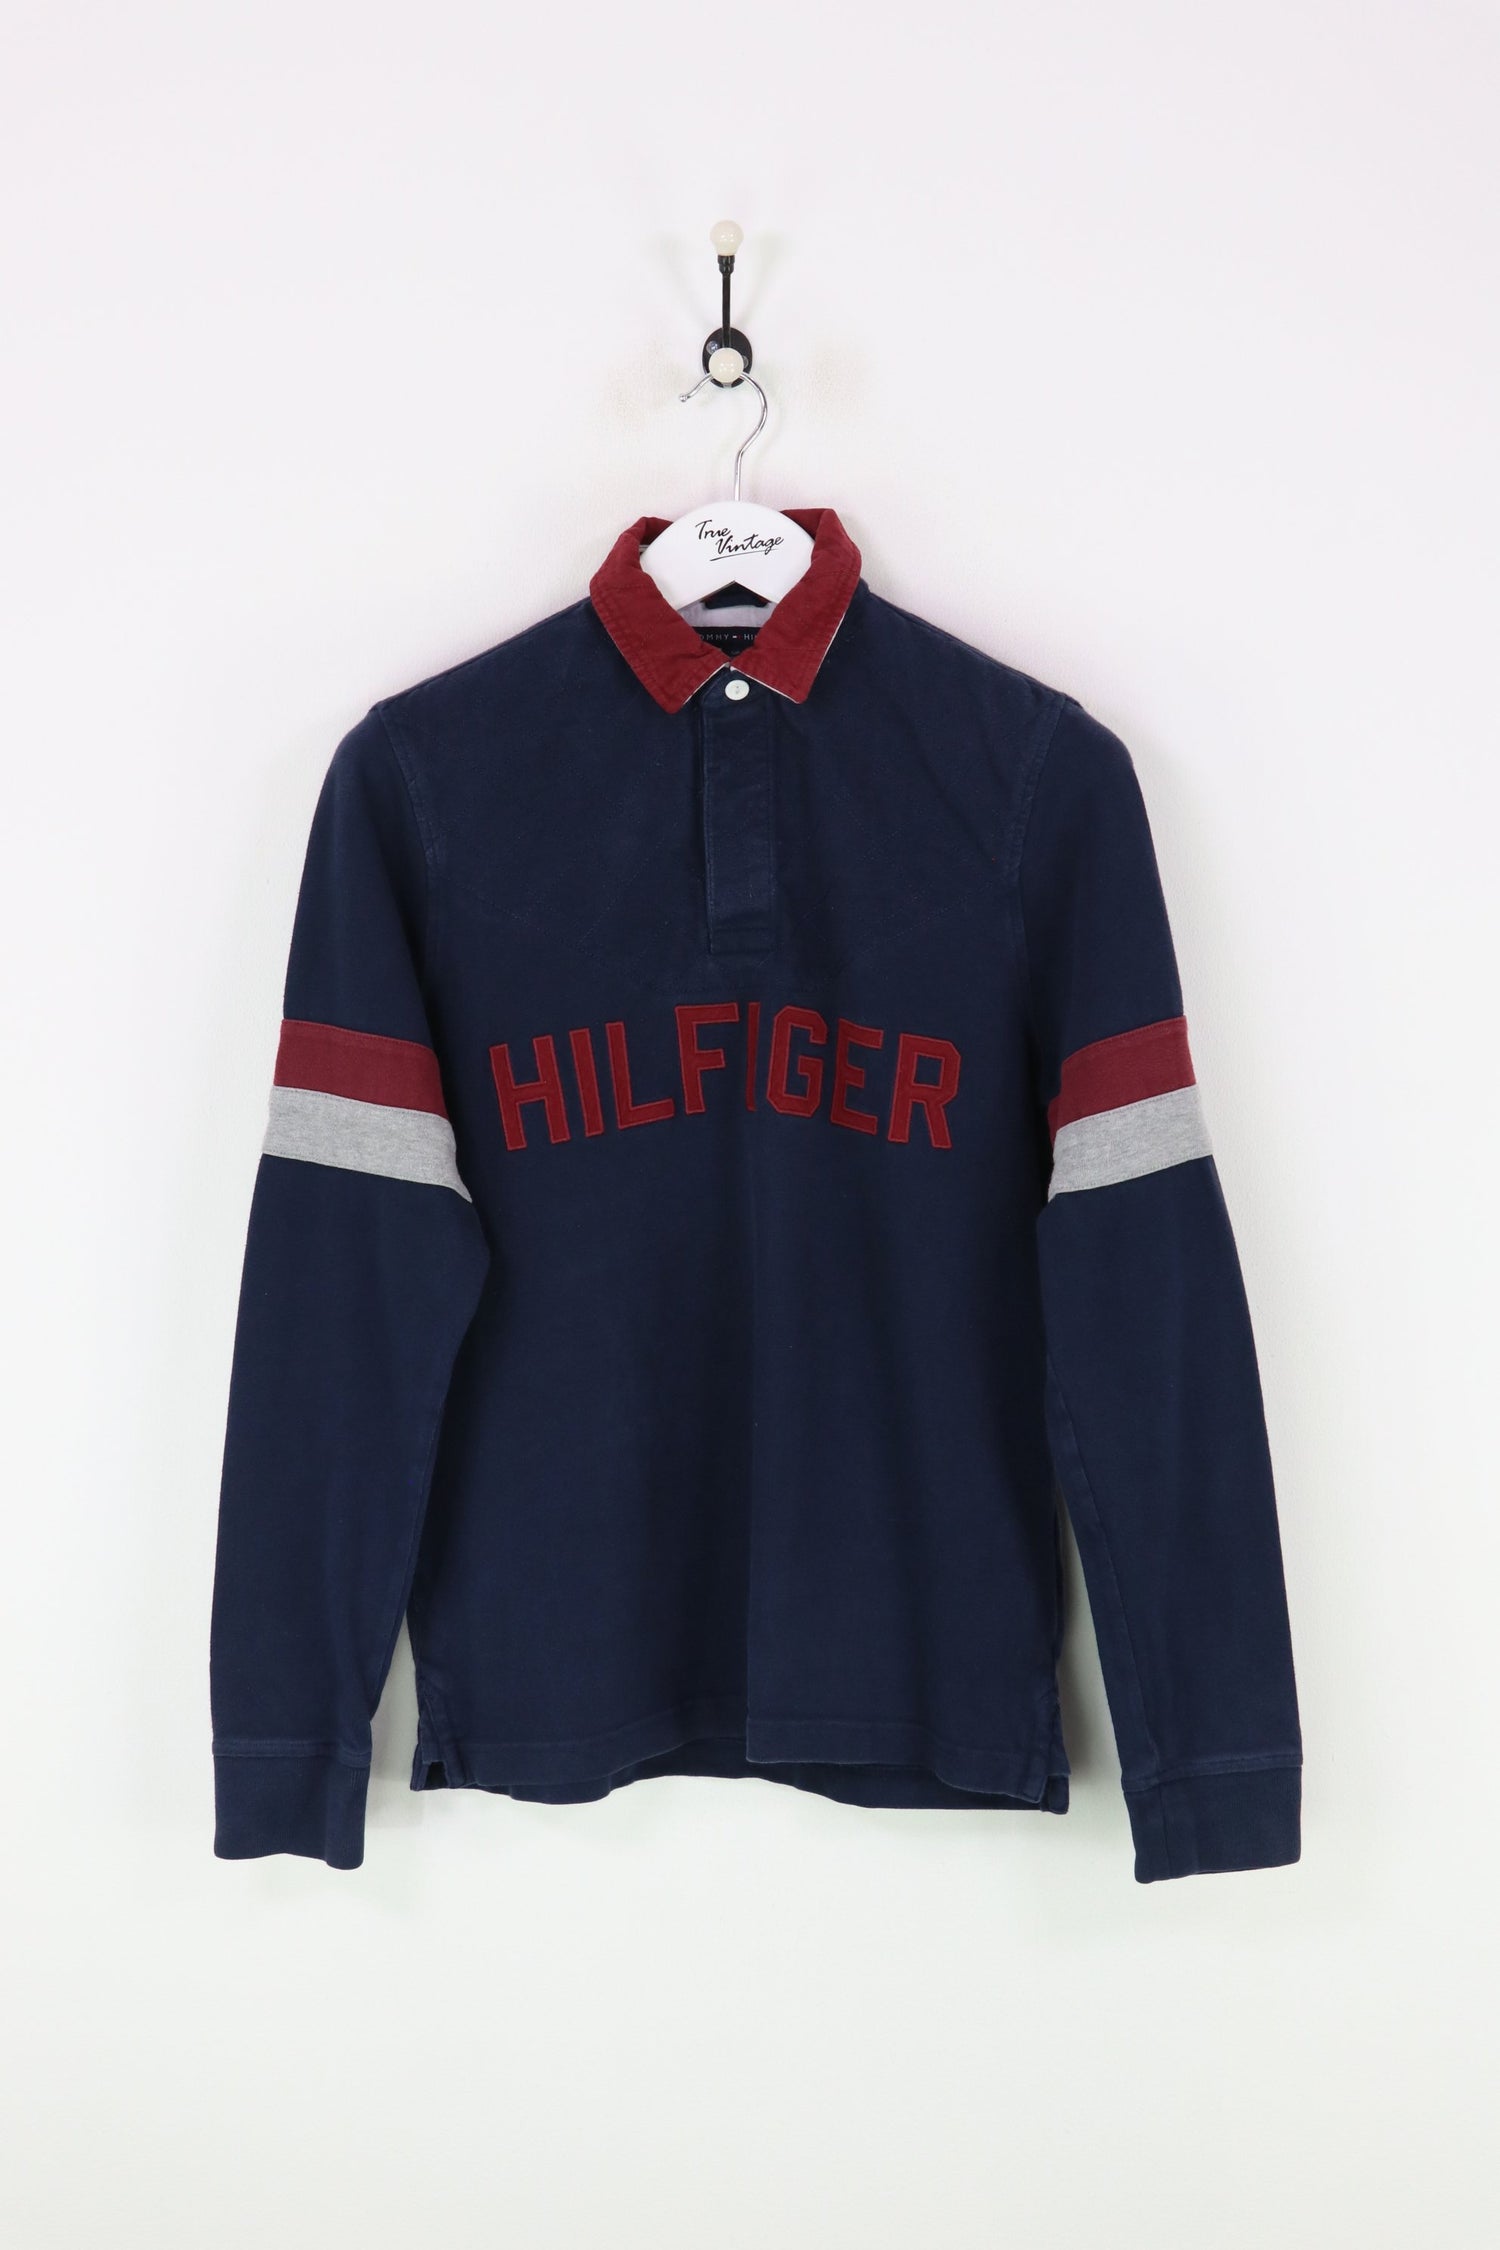 Tommy Hilfiger Rugby Top Navy Small